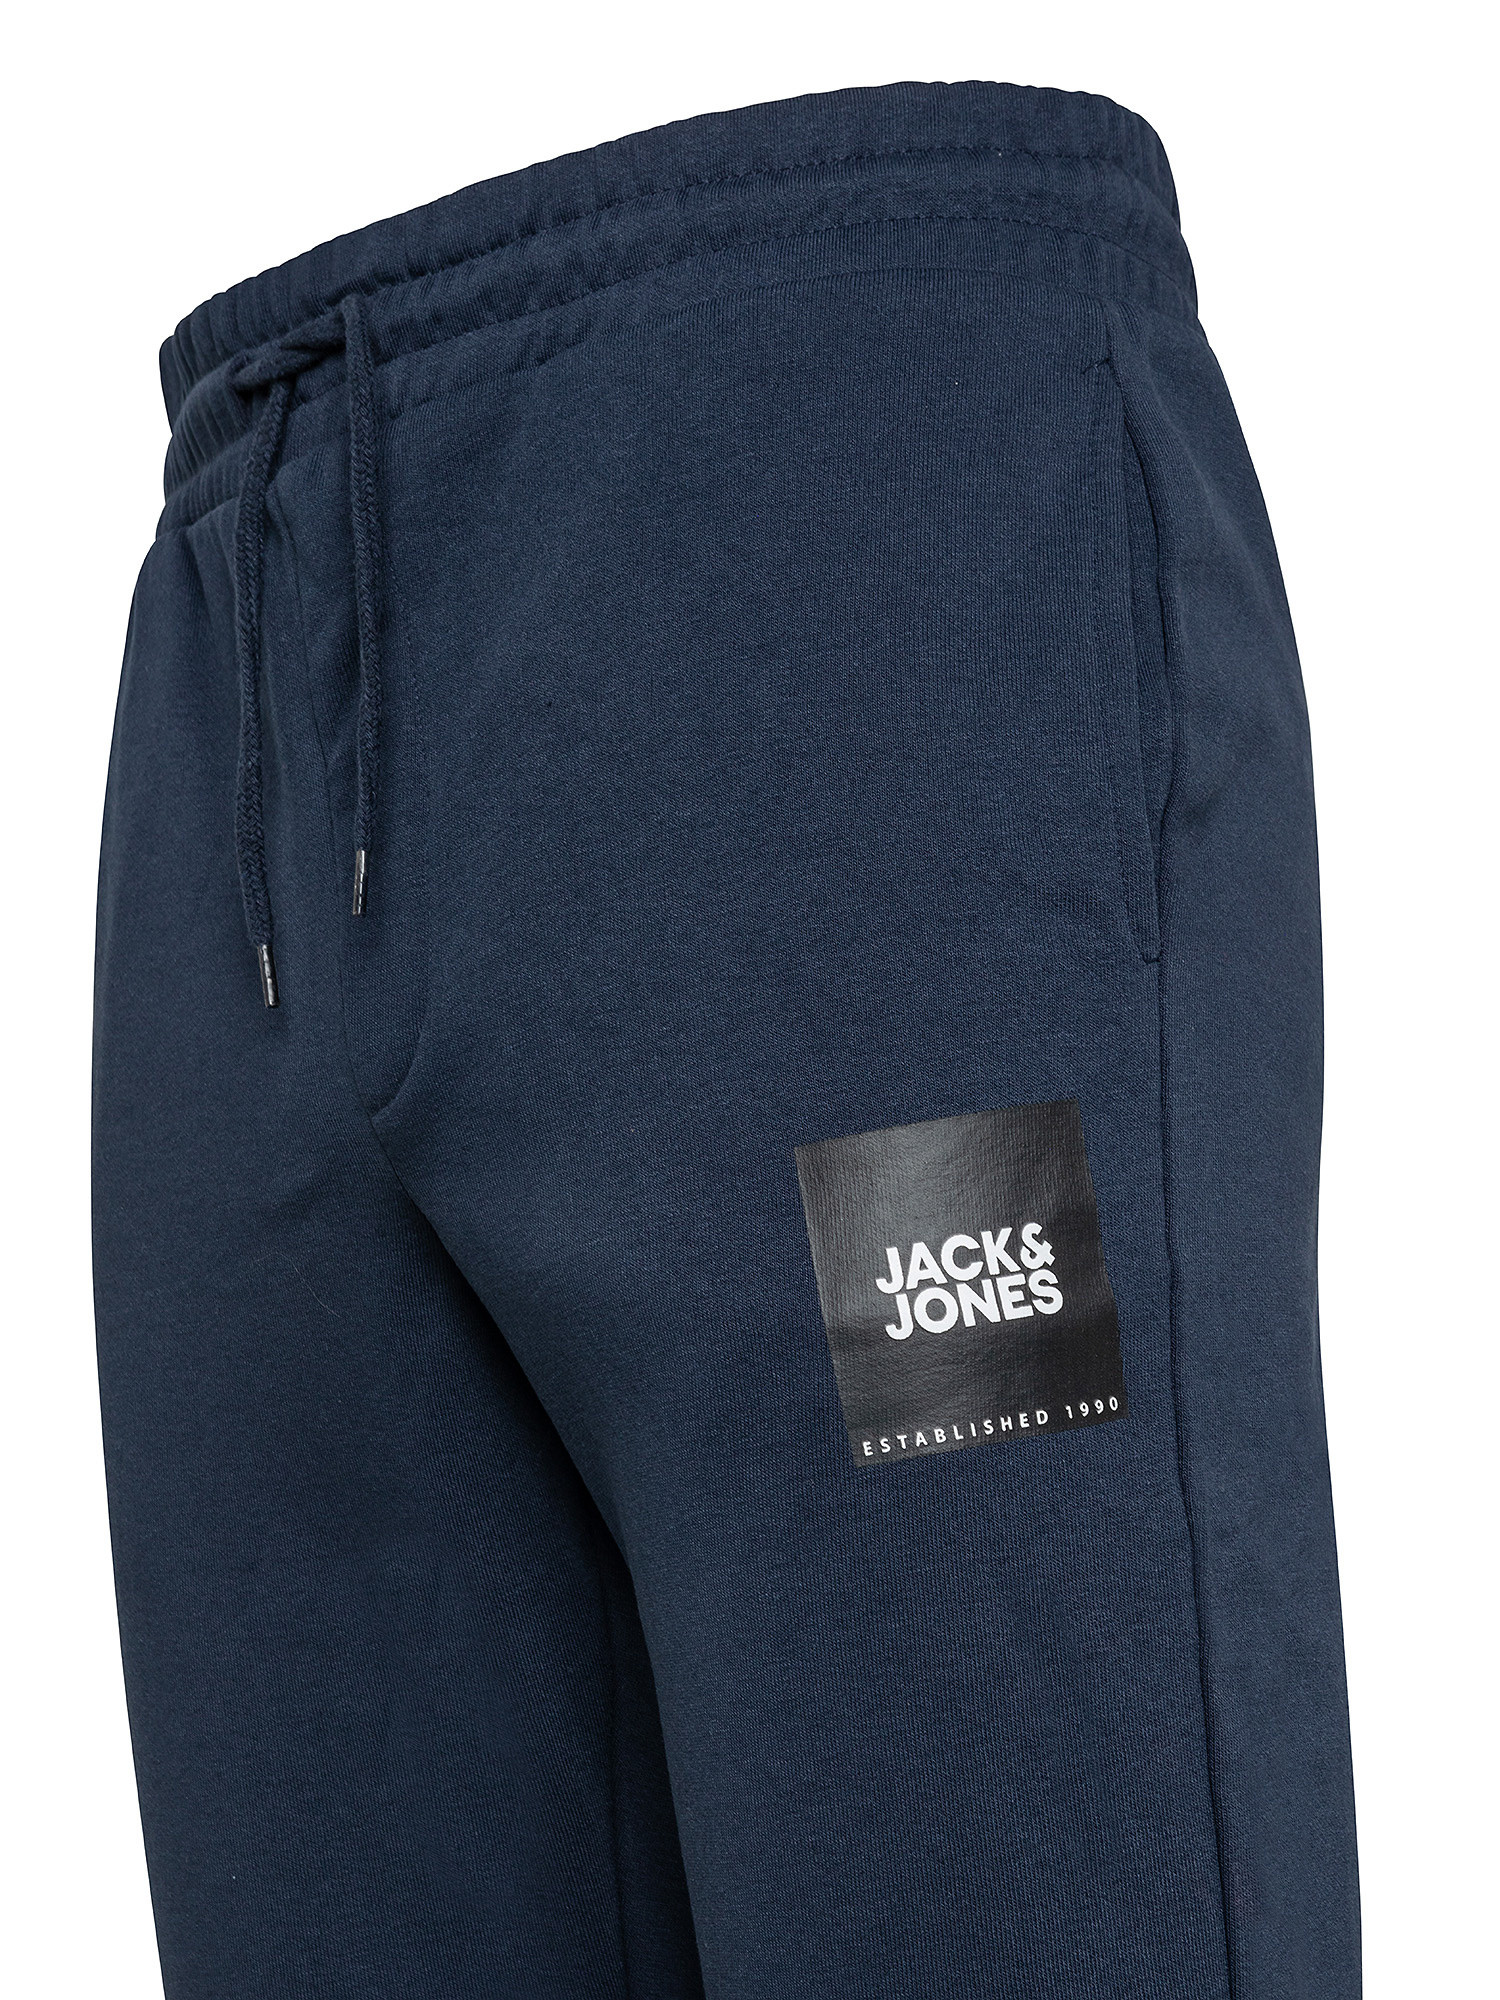 Sweatpants in cotton, Blue, large image number 2